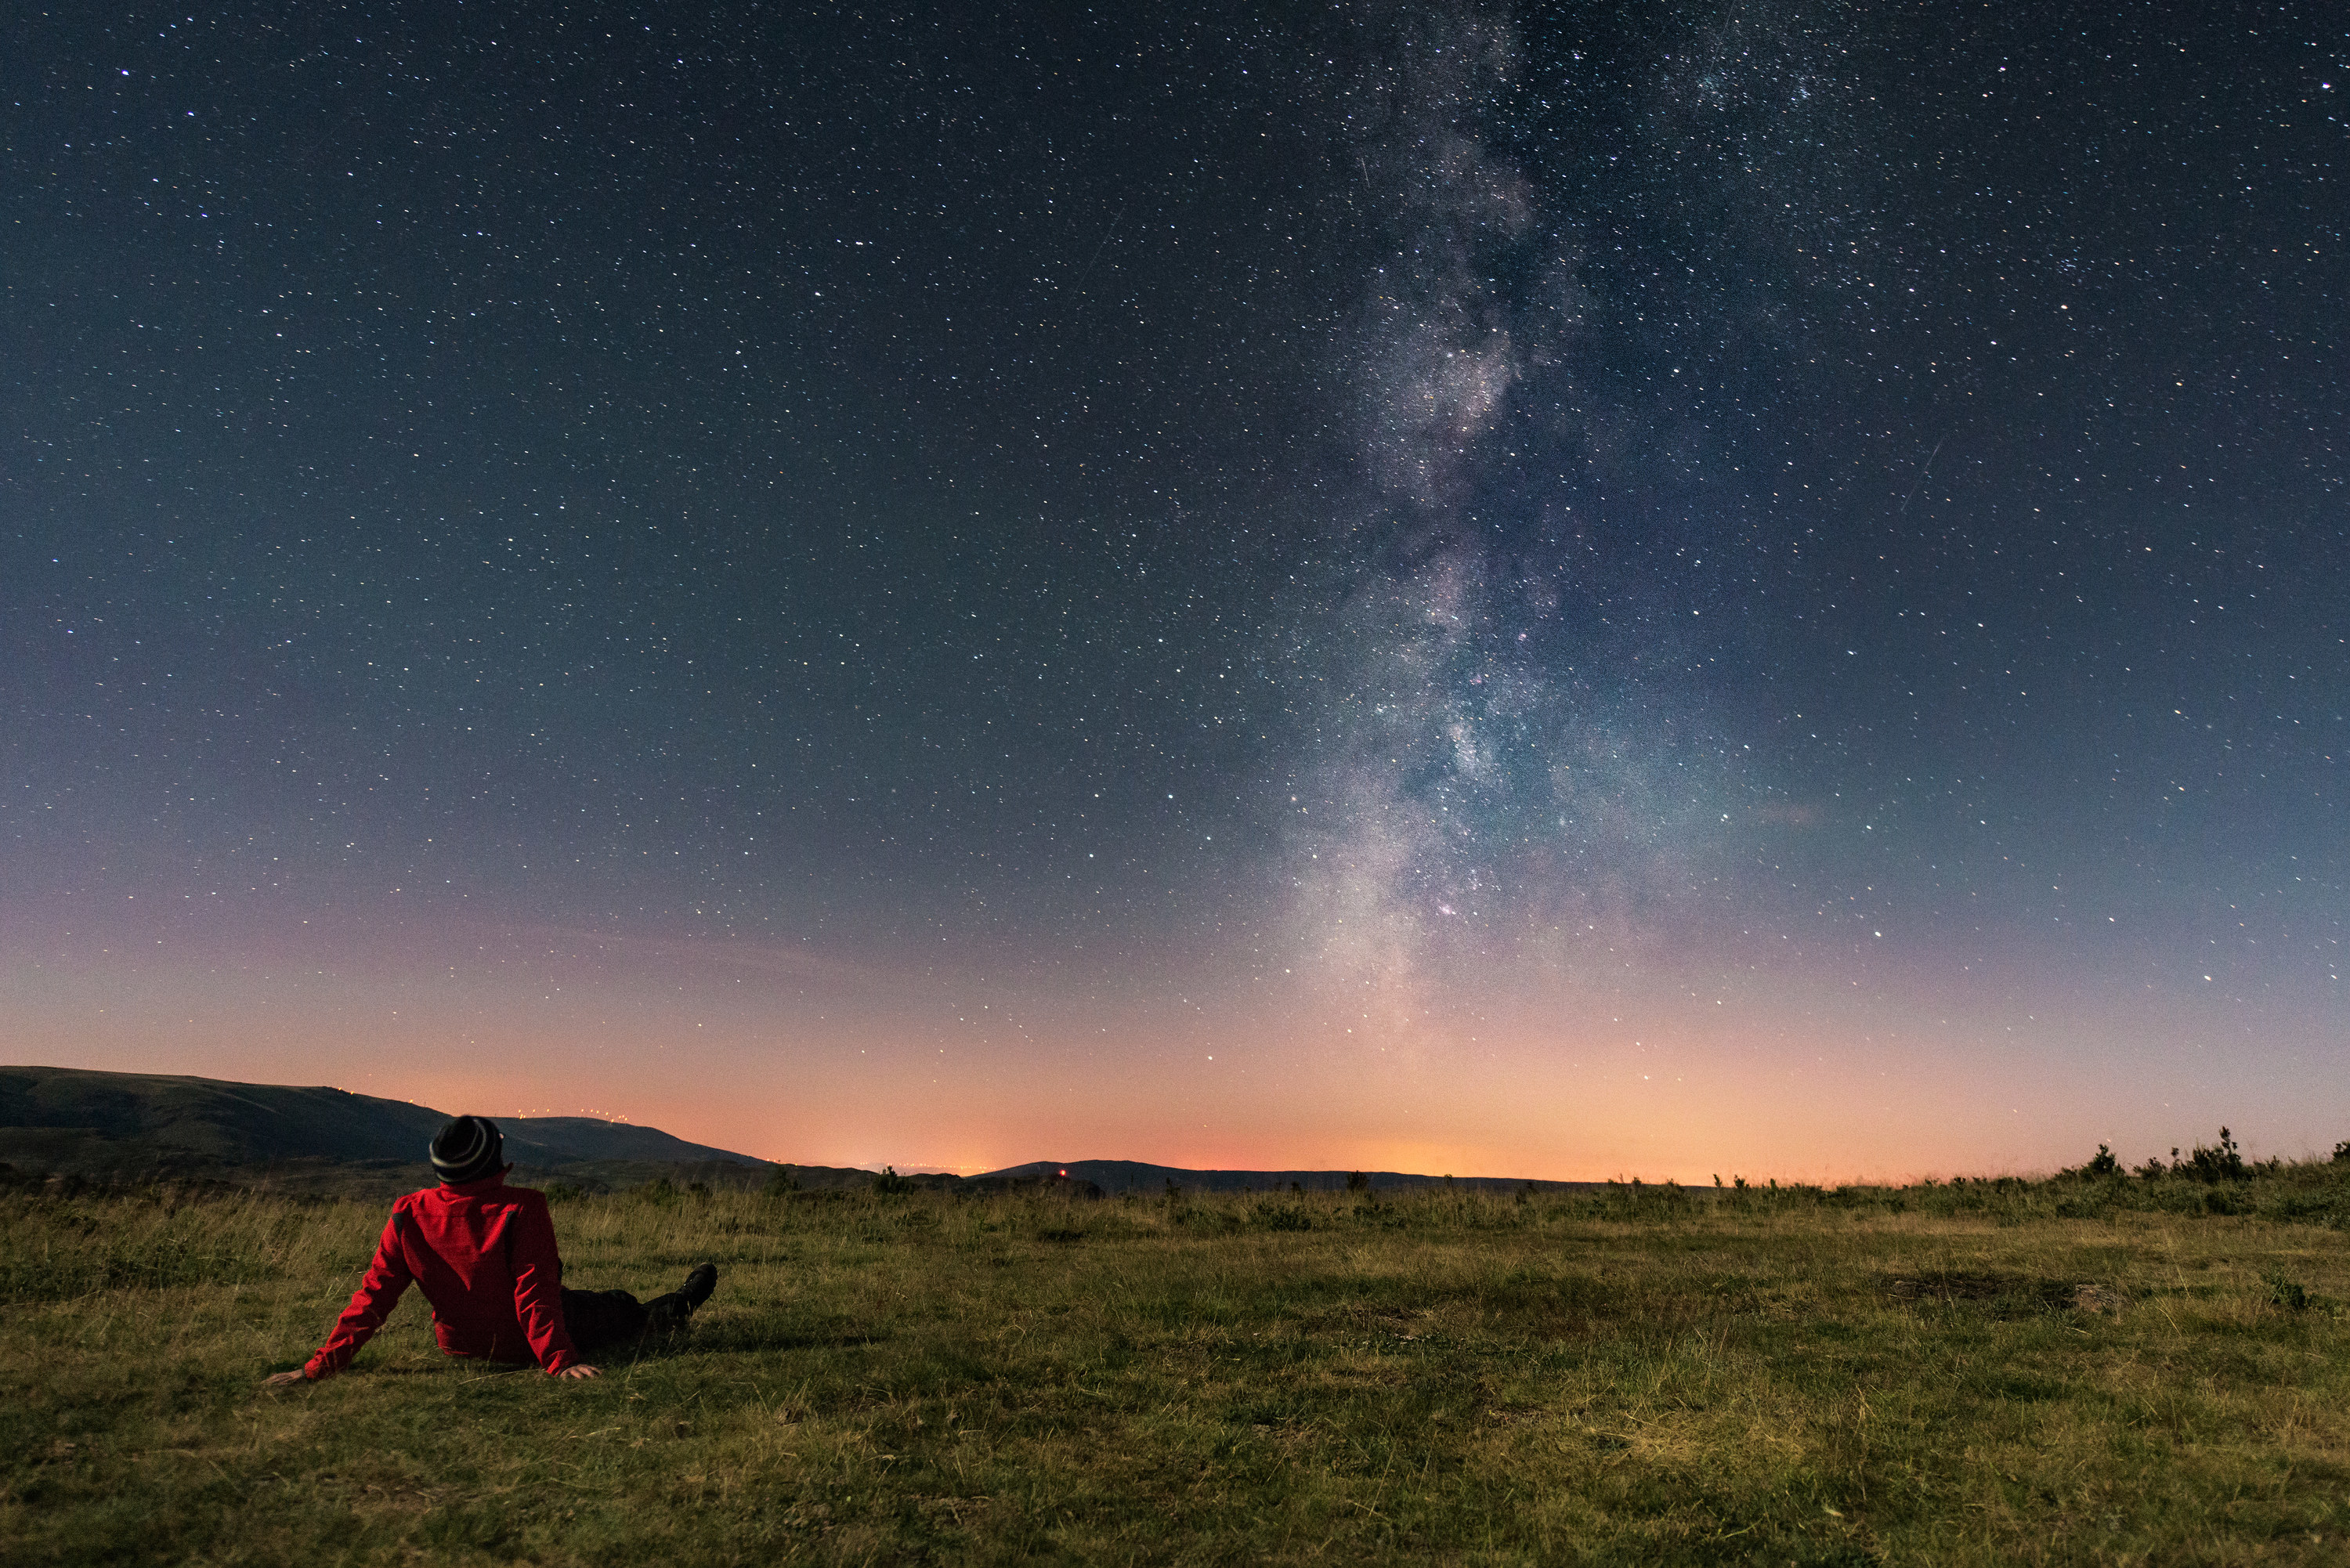 A person out in a field looking at the stars